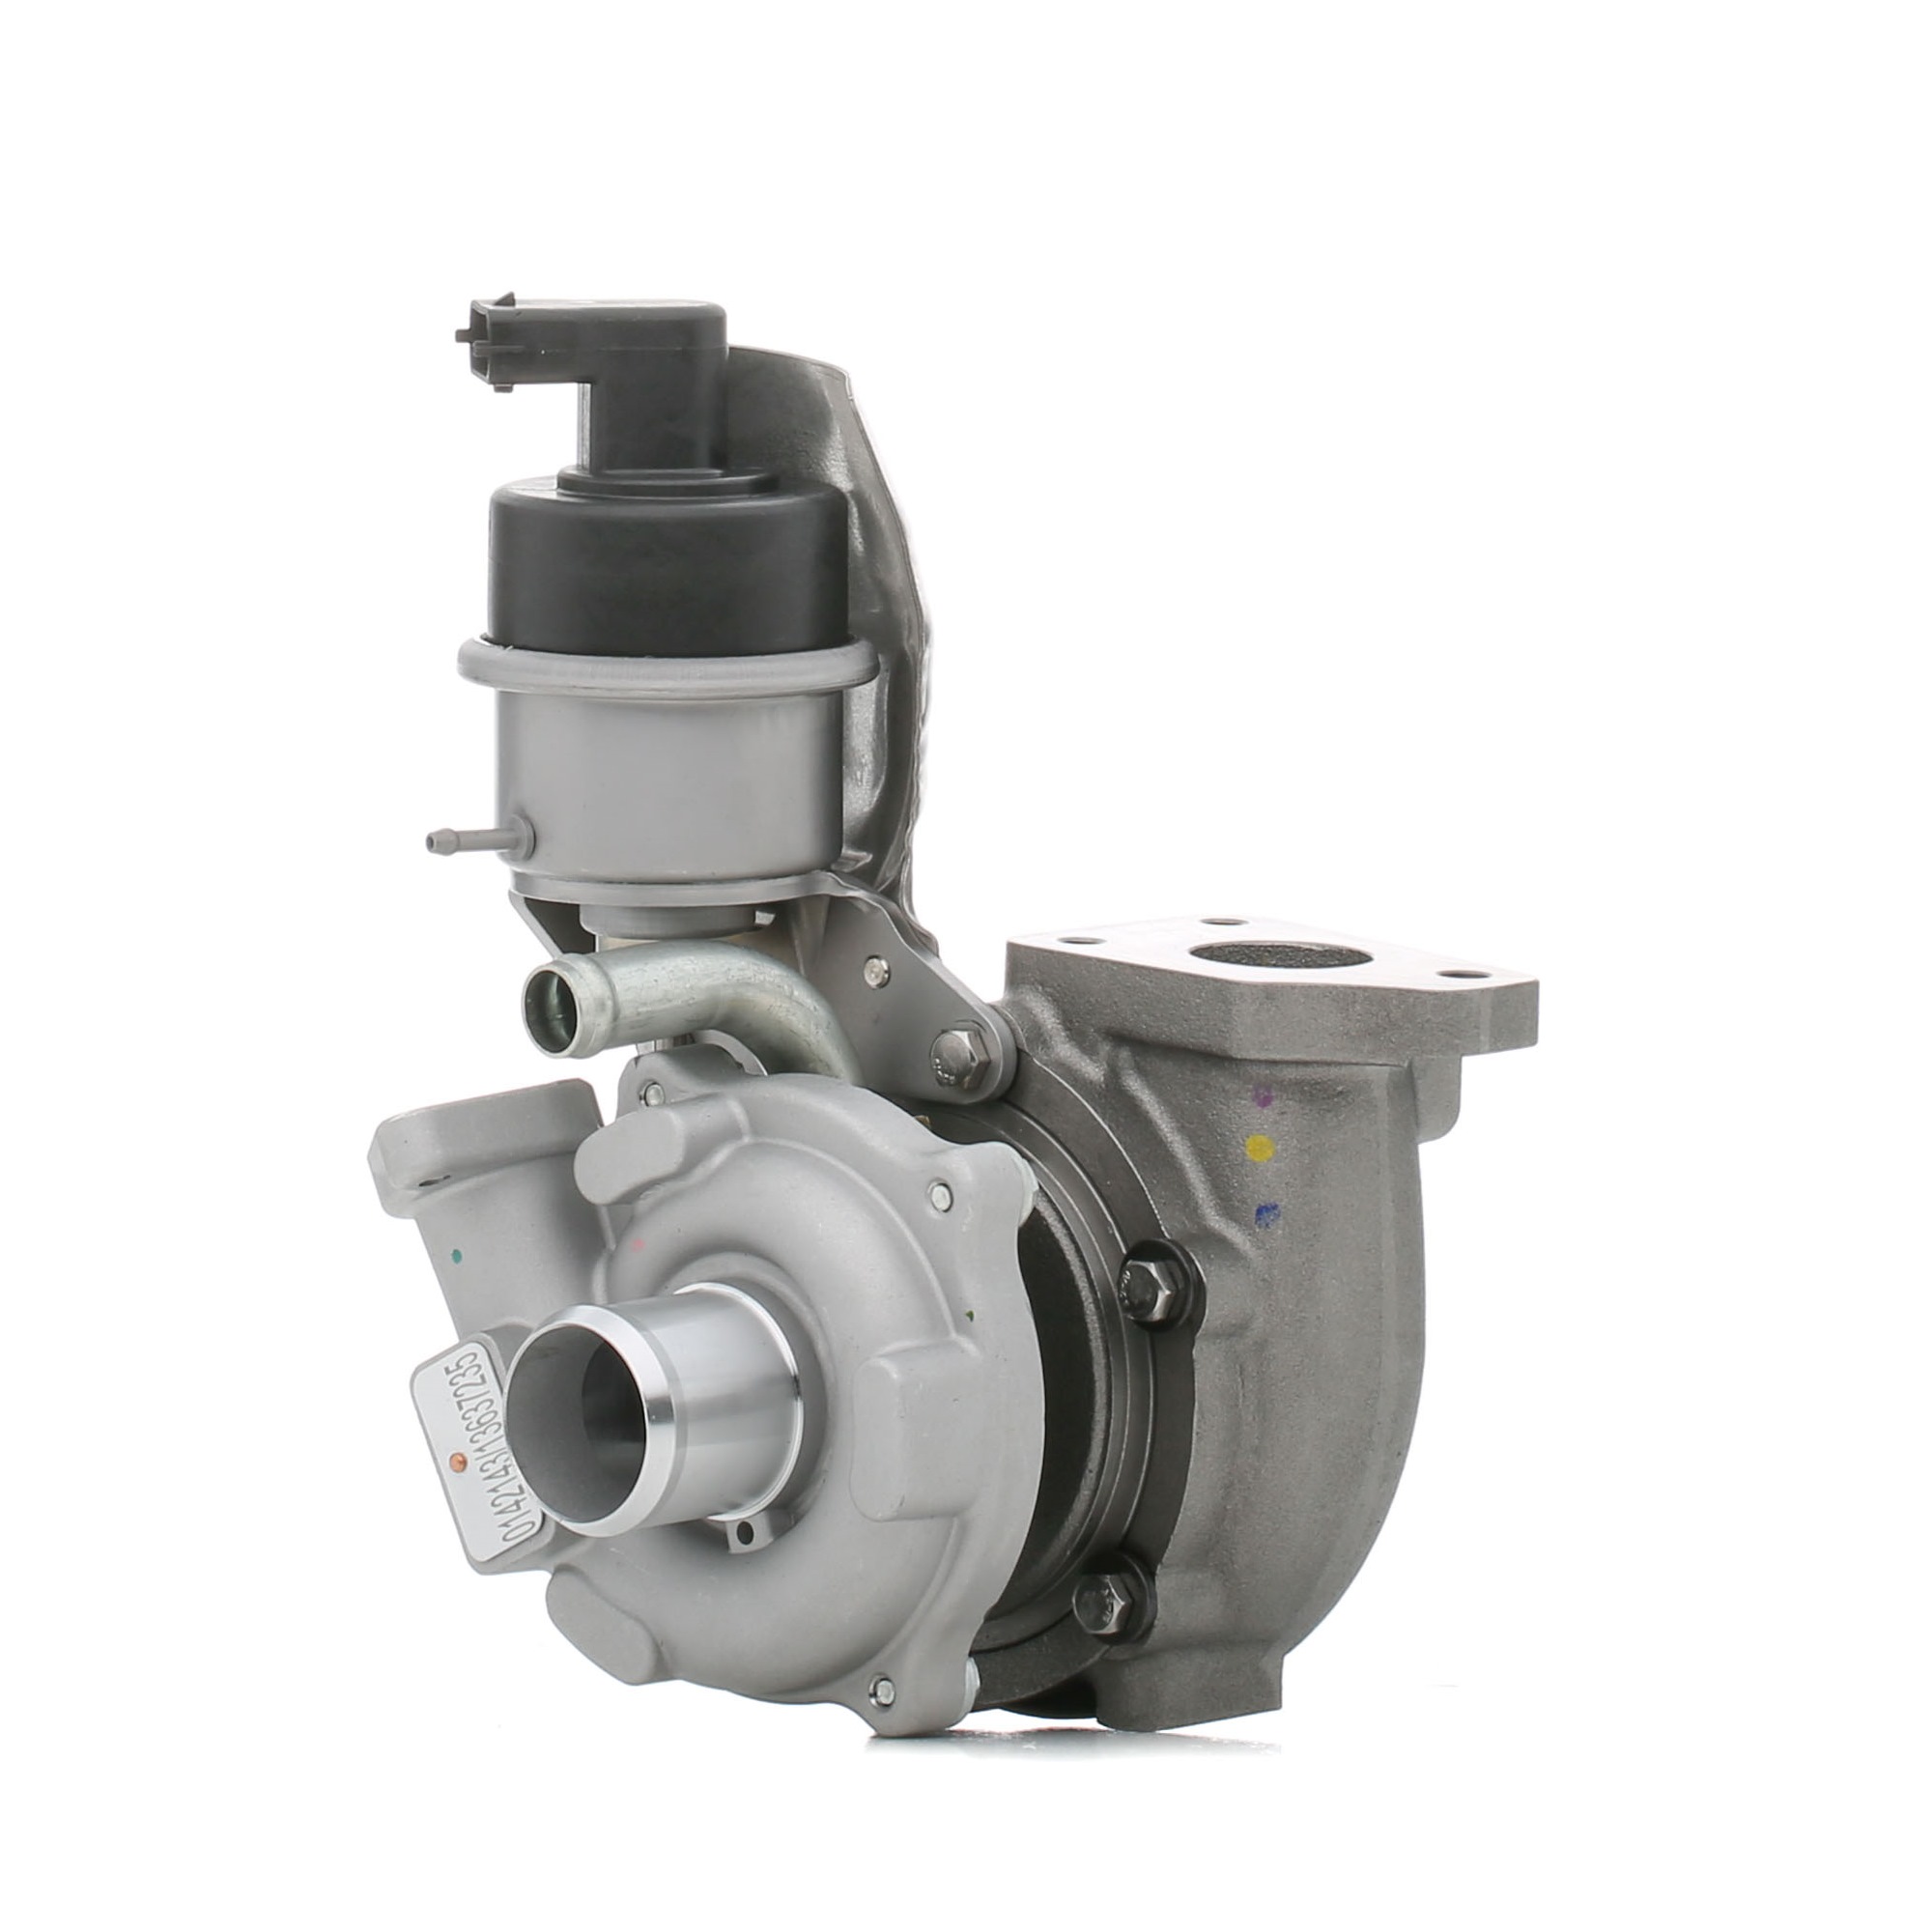 STARK SKCT-1190122 Turbocharger Turbocharger/Charge Air cooler, without attachment material